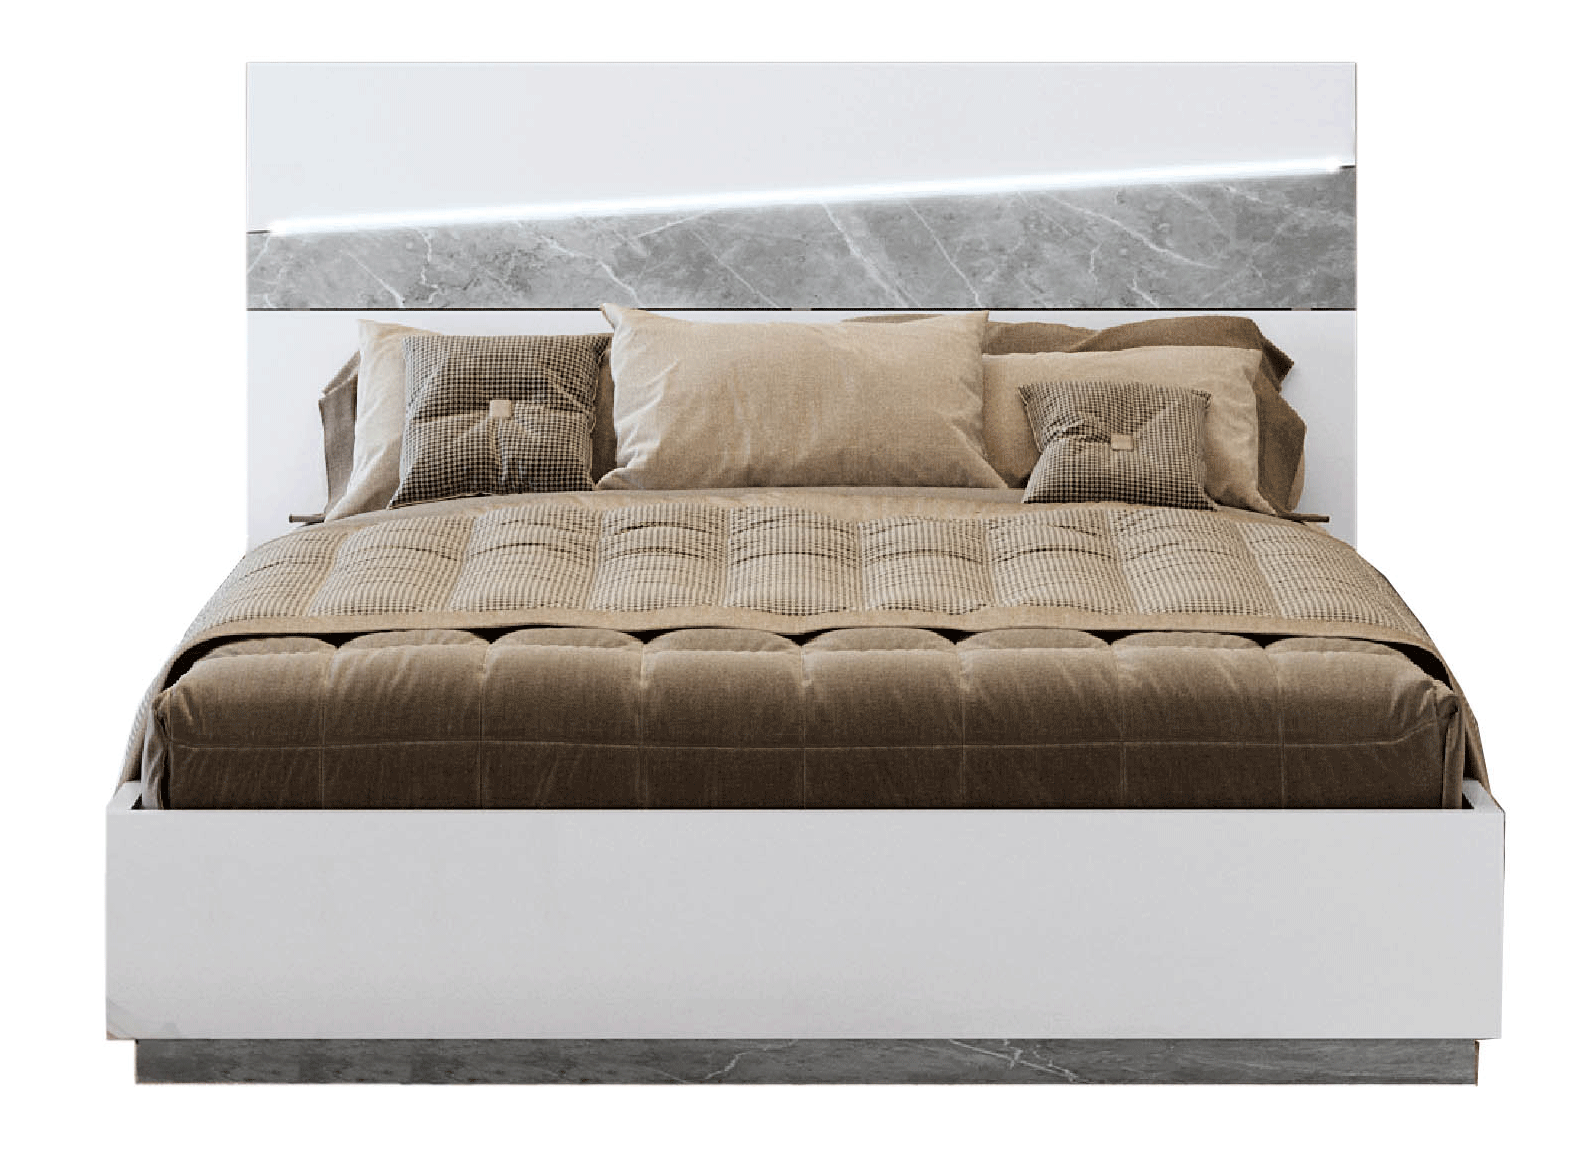 Brands Camel Gold Collection, Italy Alba Bed w/ Light, Italy